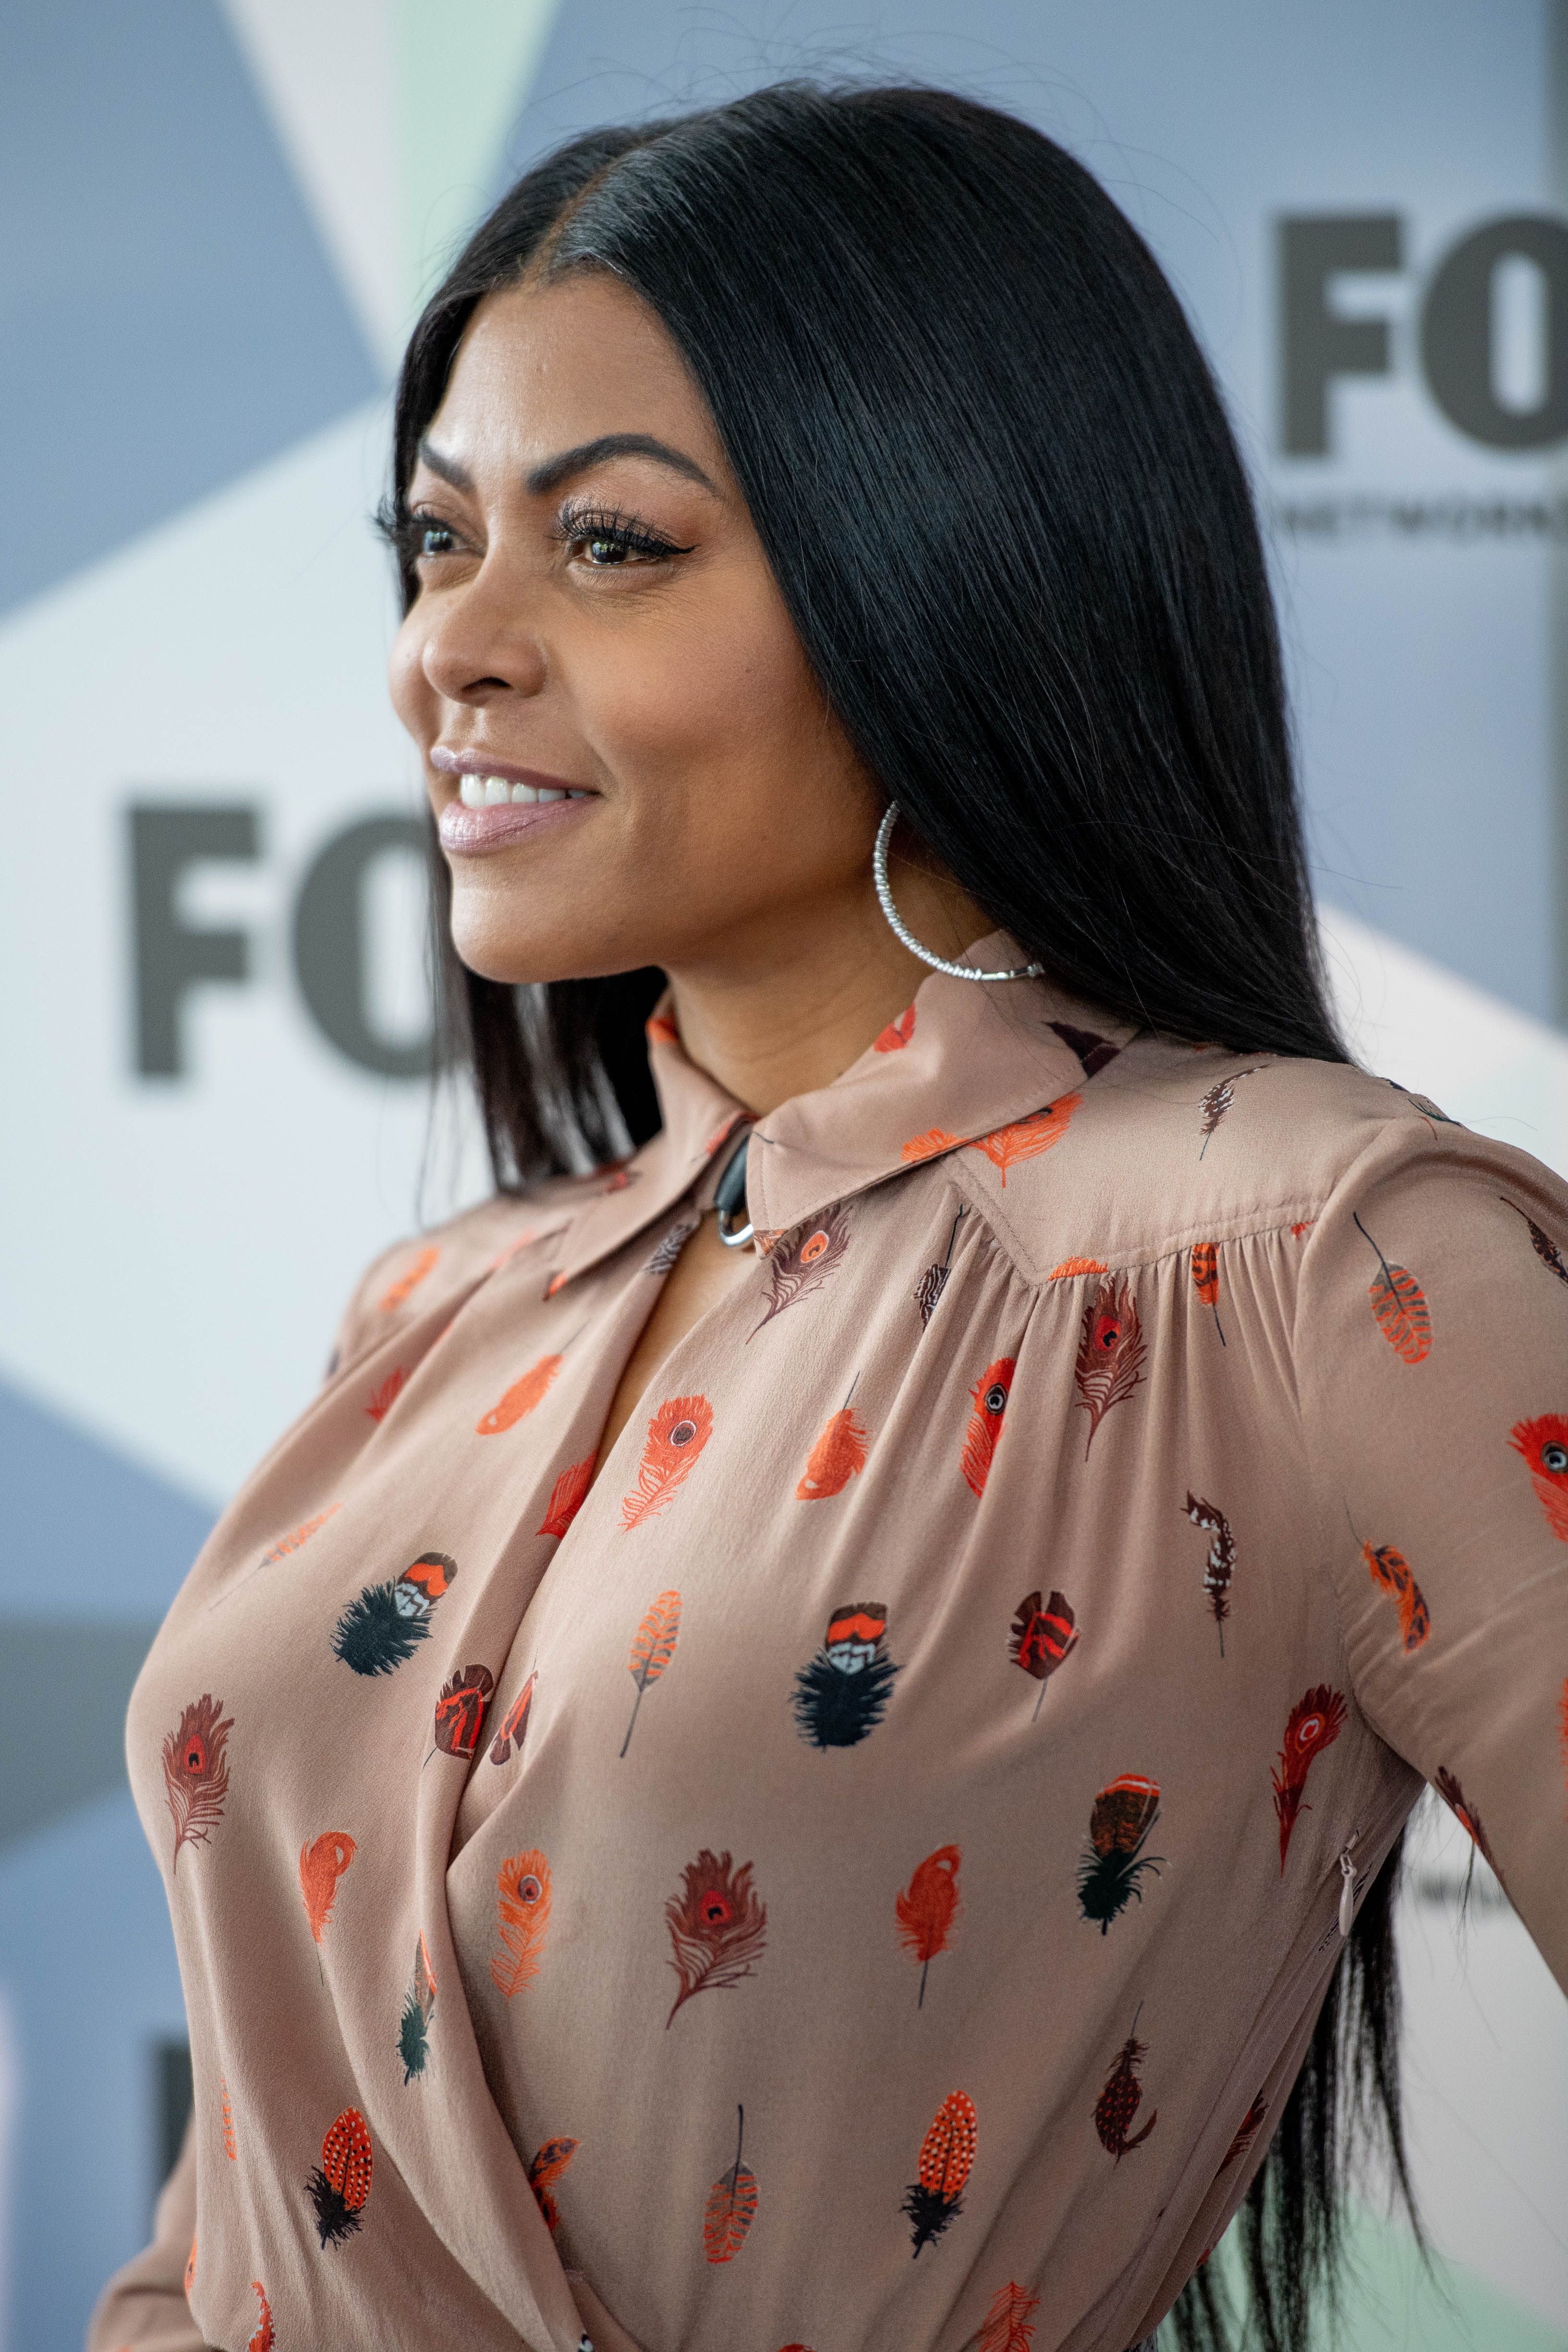 Taraji P. Henson at the 2018 Fox Network Upfront at Wollman Rink, Central Park on May 14, 2018 in New York City. | Source: Getty Images